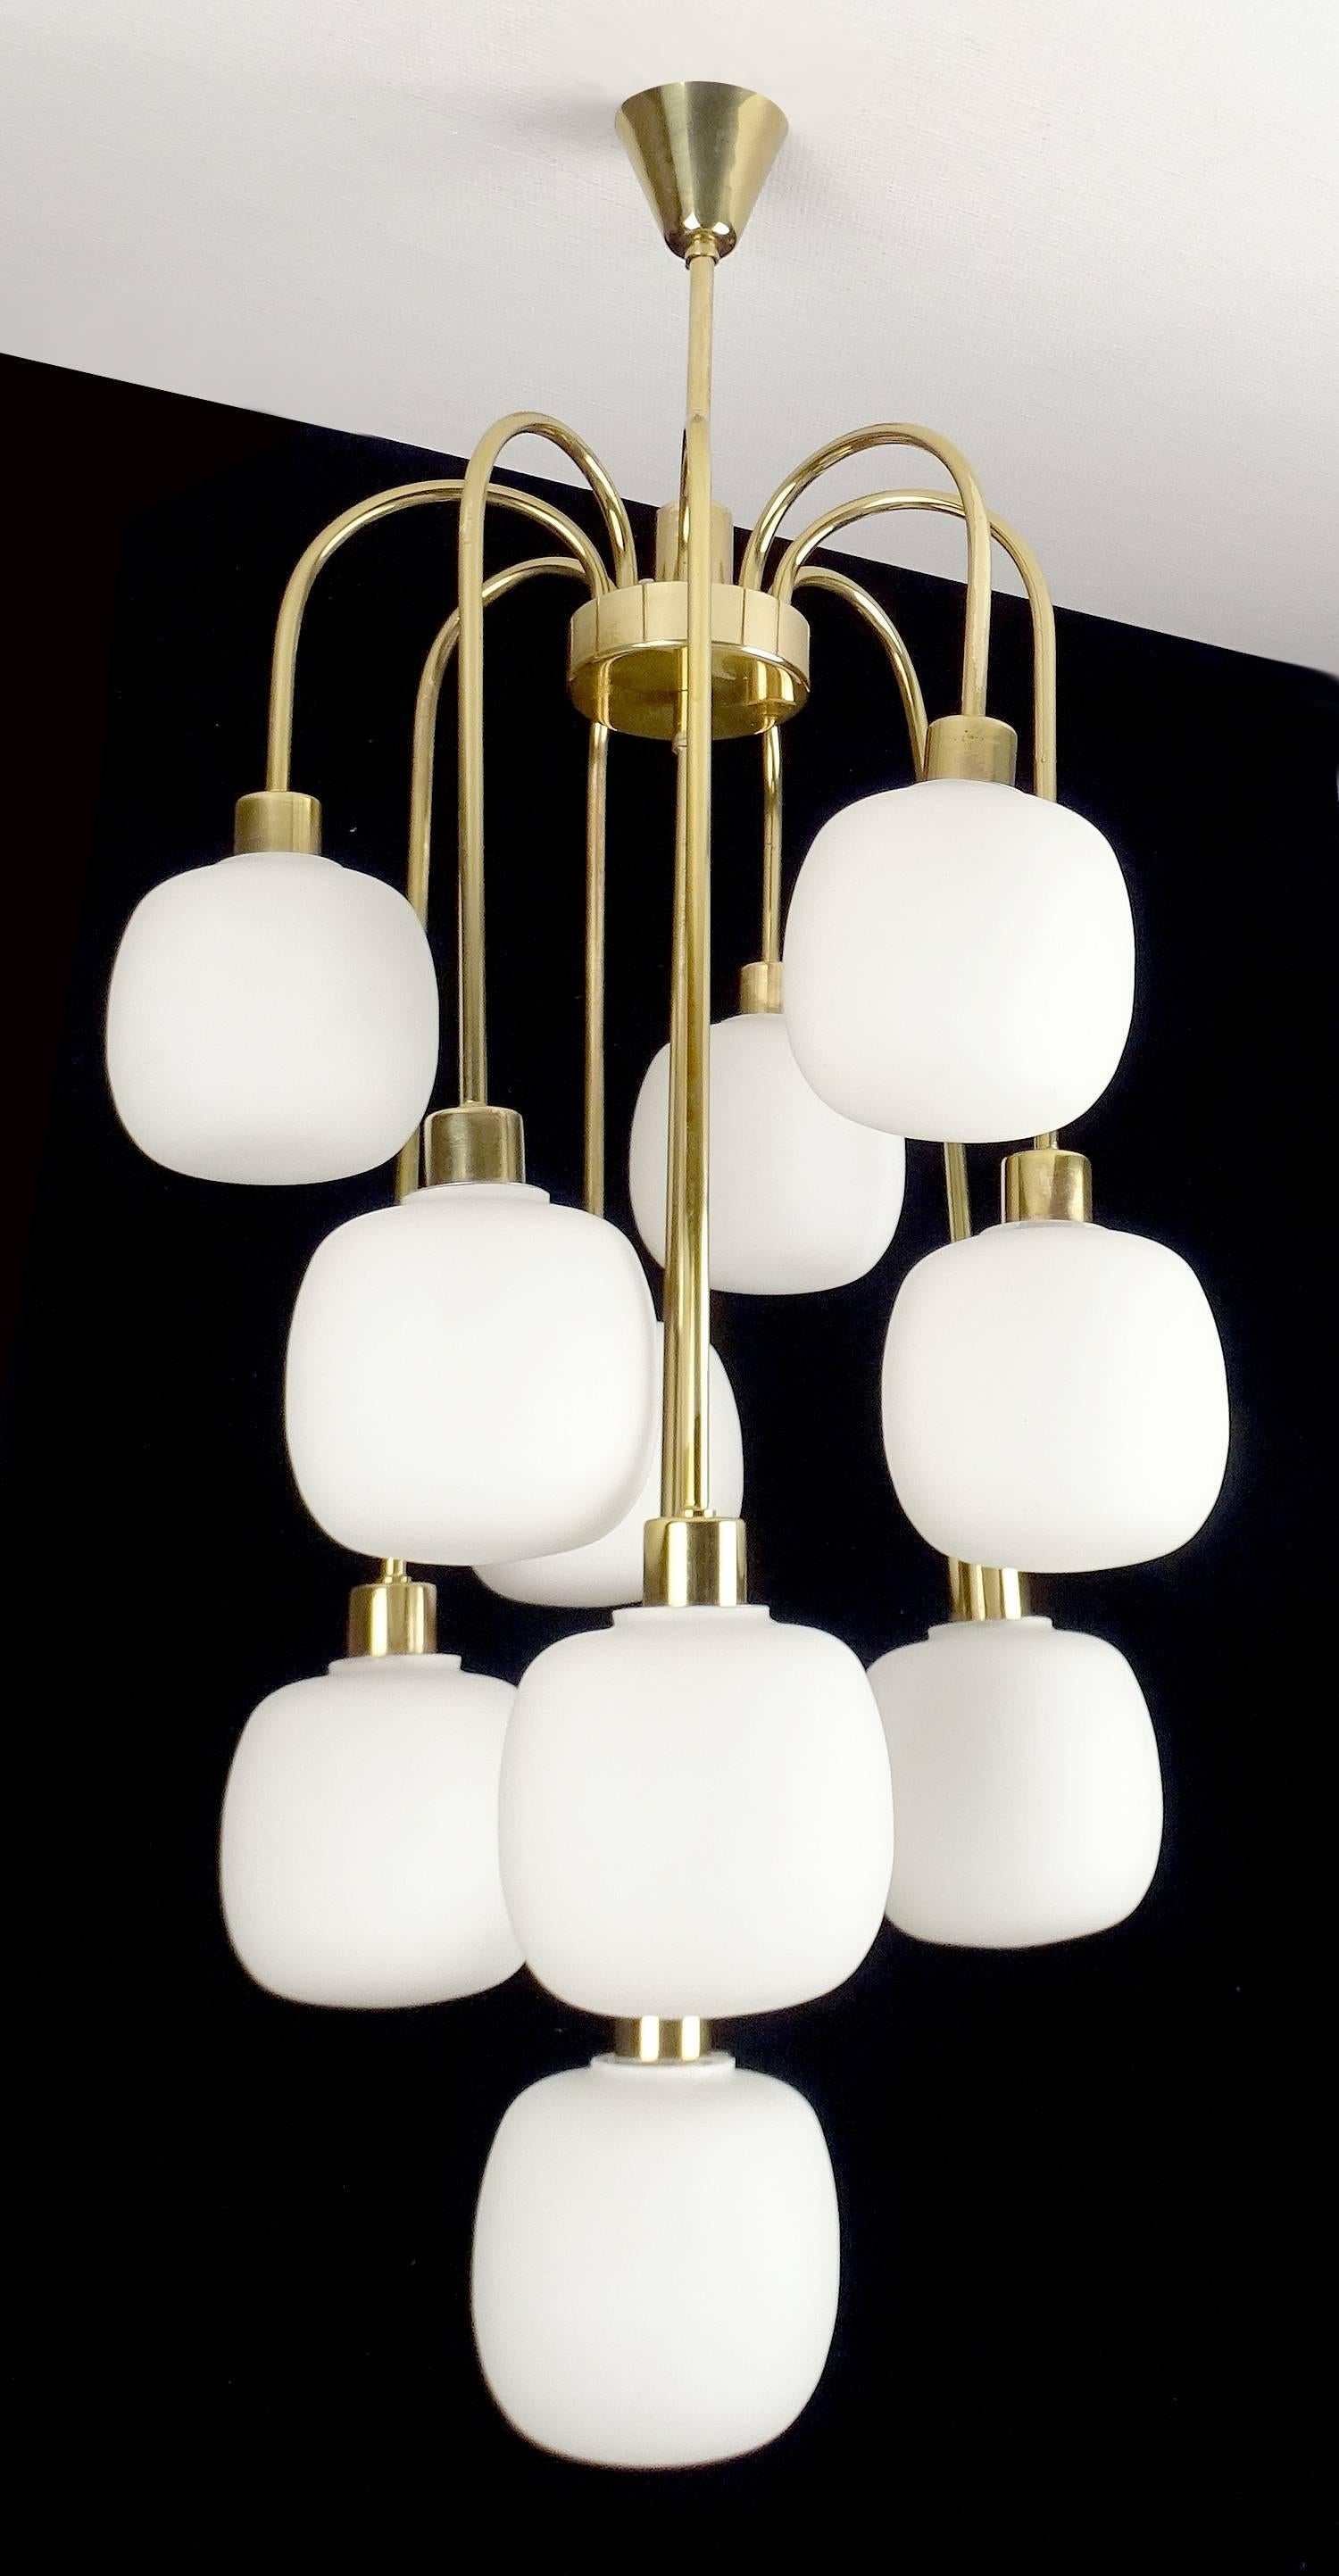 Mid-20th Century Large Cascade Italian Glass and Brass Chandelier, 1960s Modernist Pendant Lamp